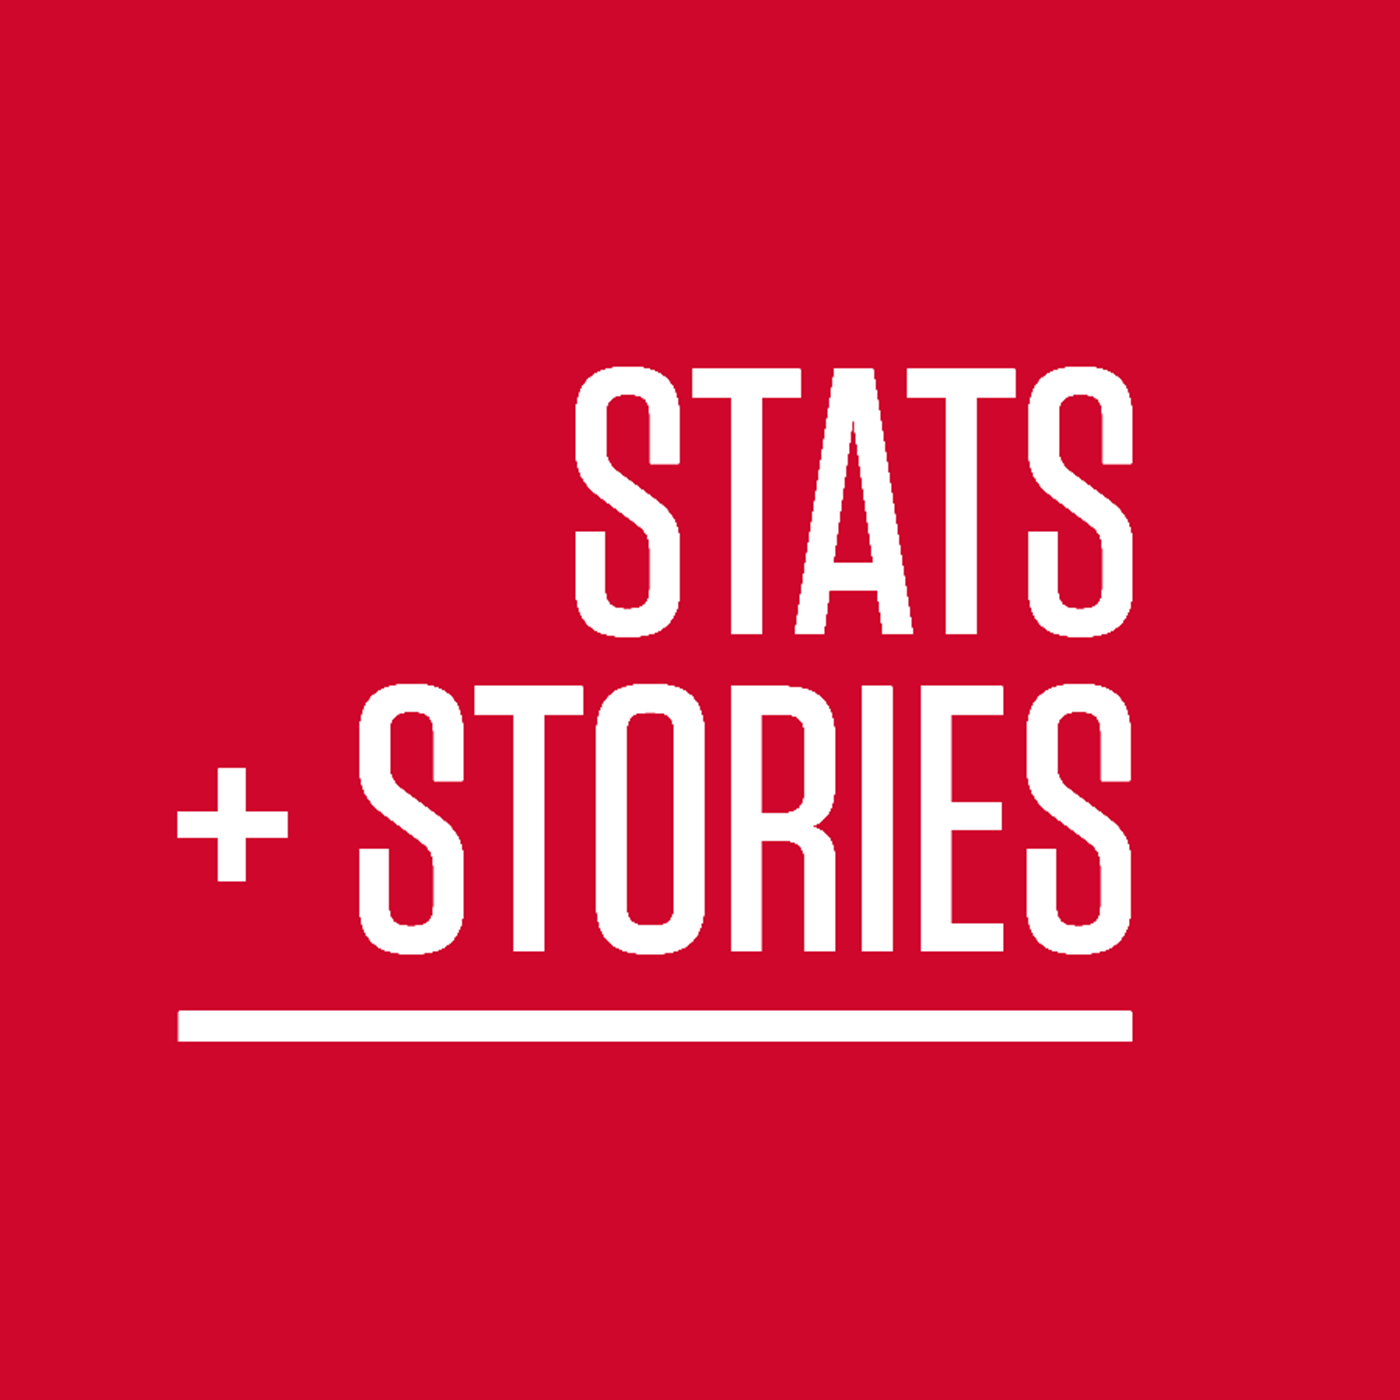 Stats_and_stories logo, red background, white text